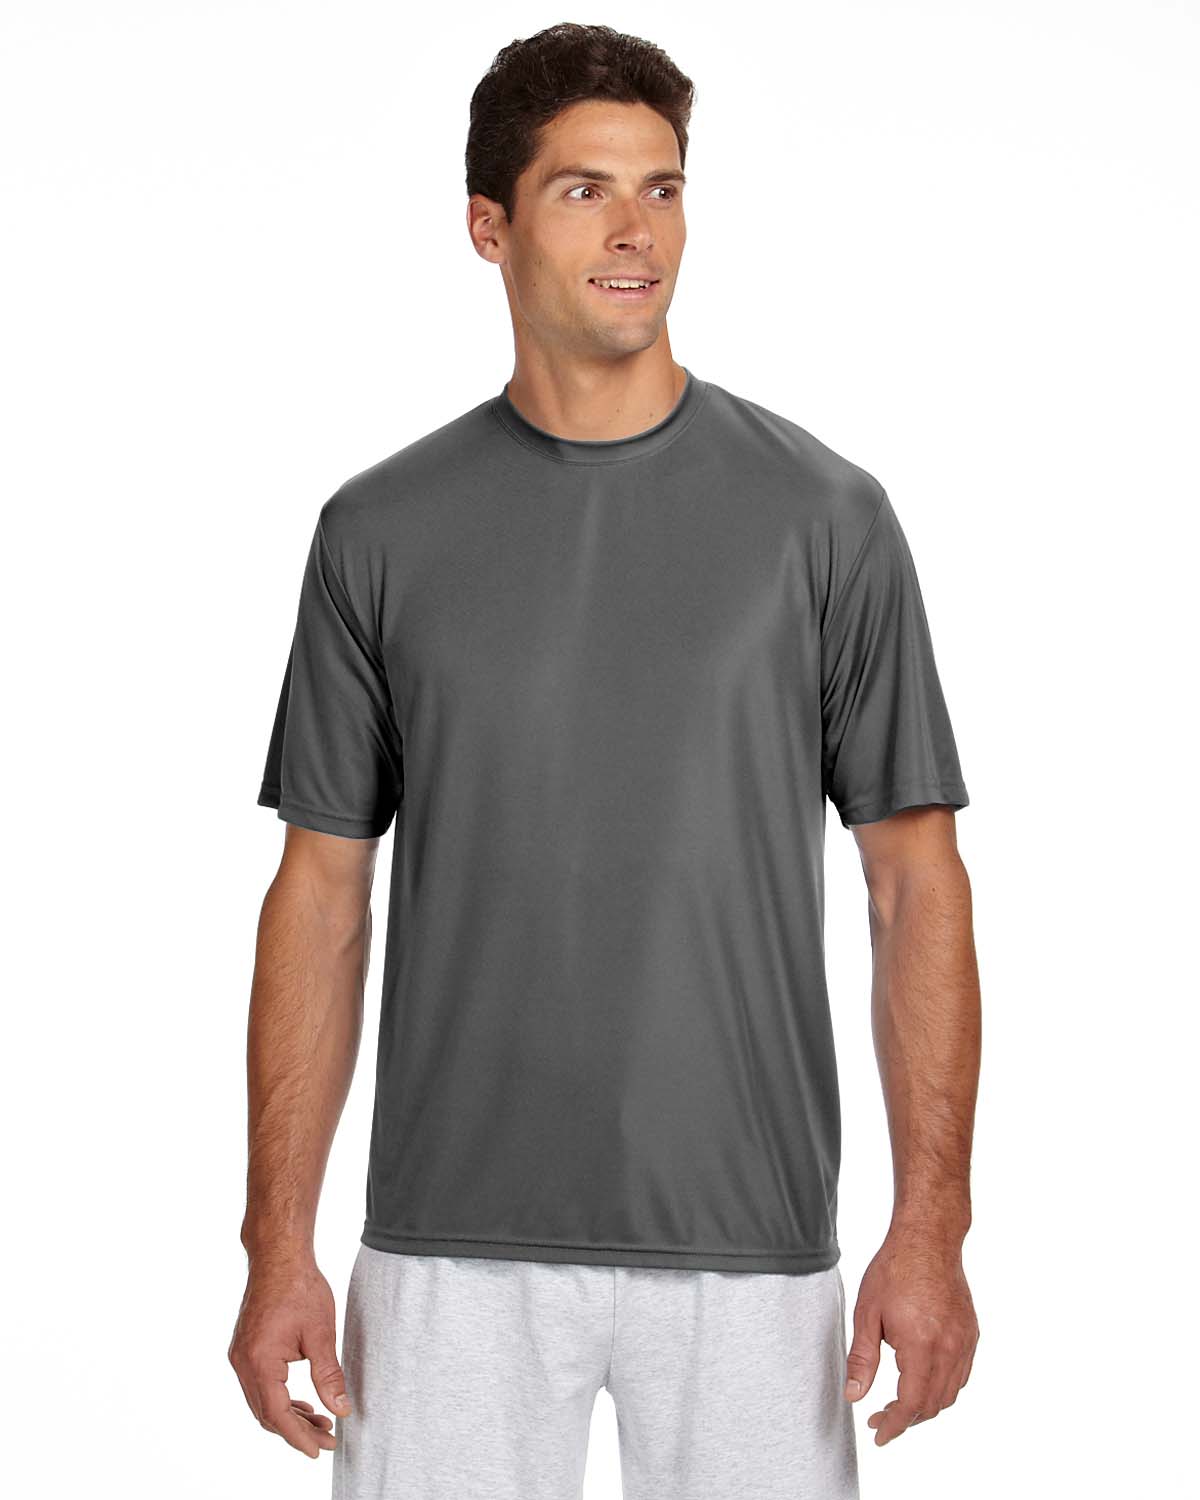 NEW A4 Men's Workout Running Cooling 100% Polyester ...